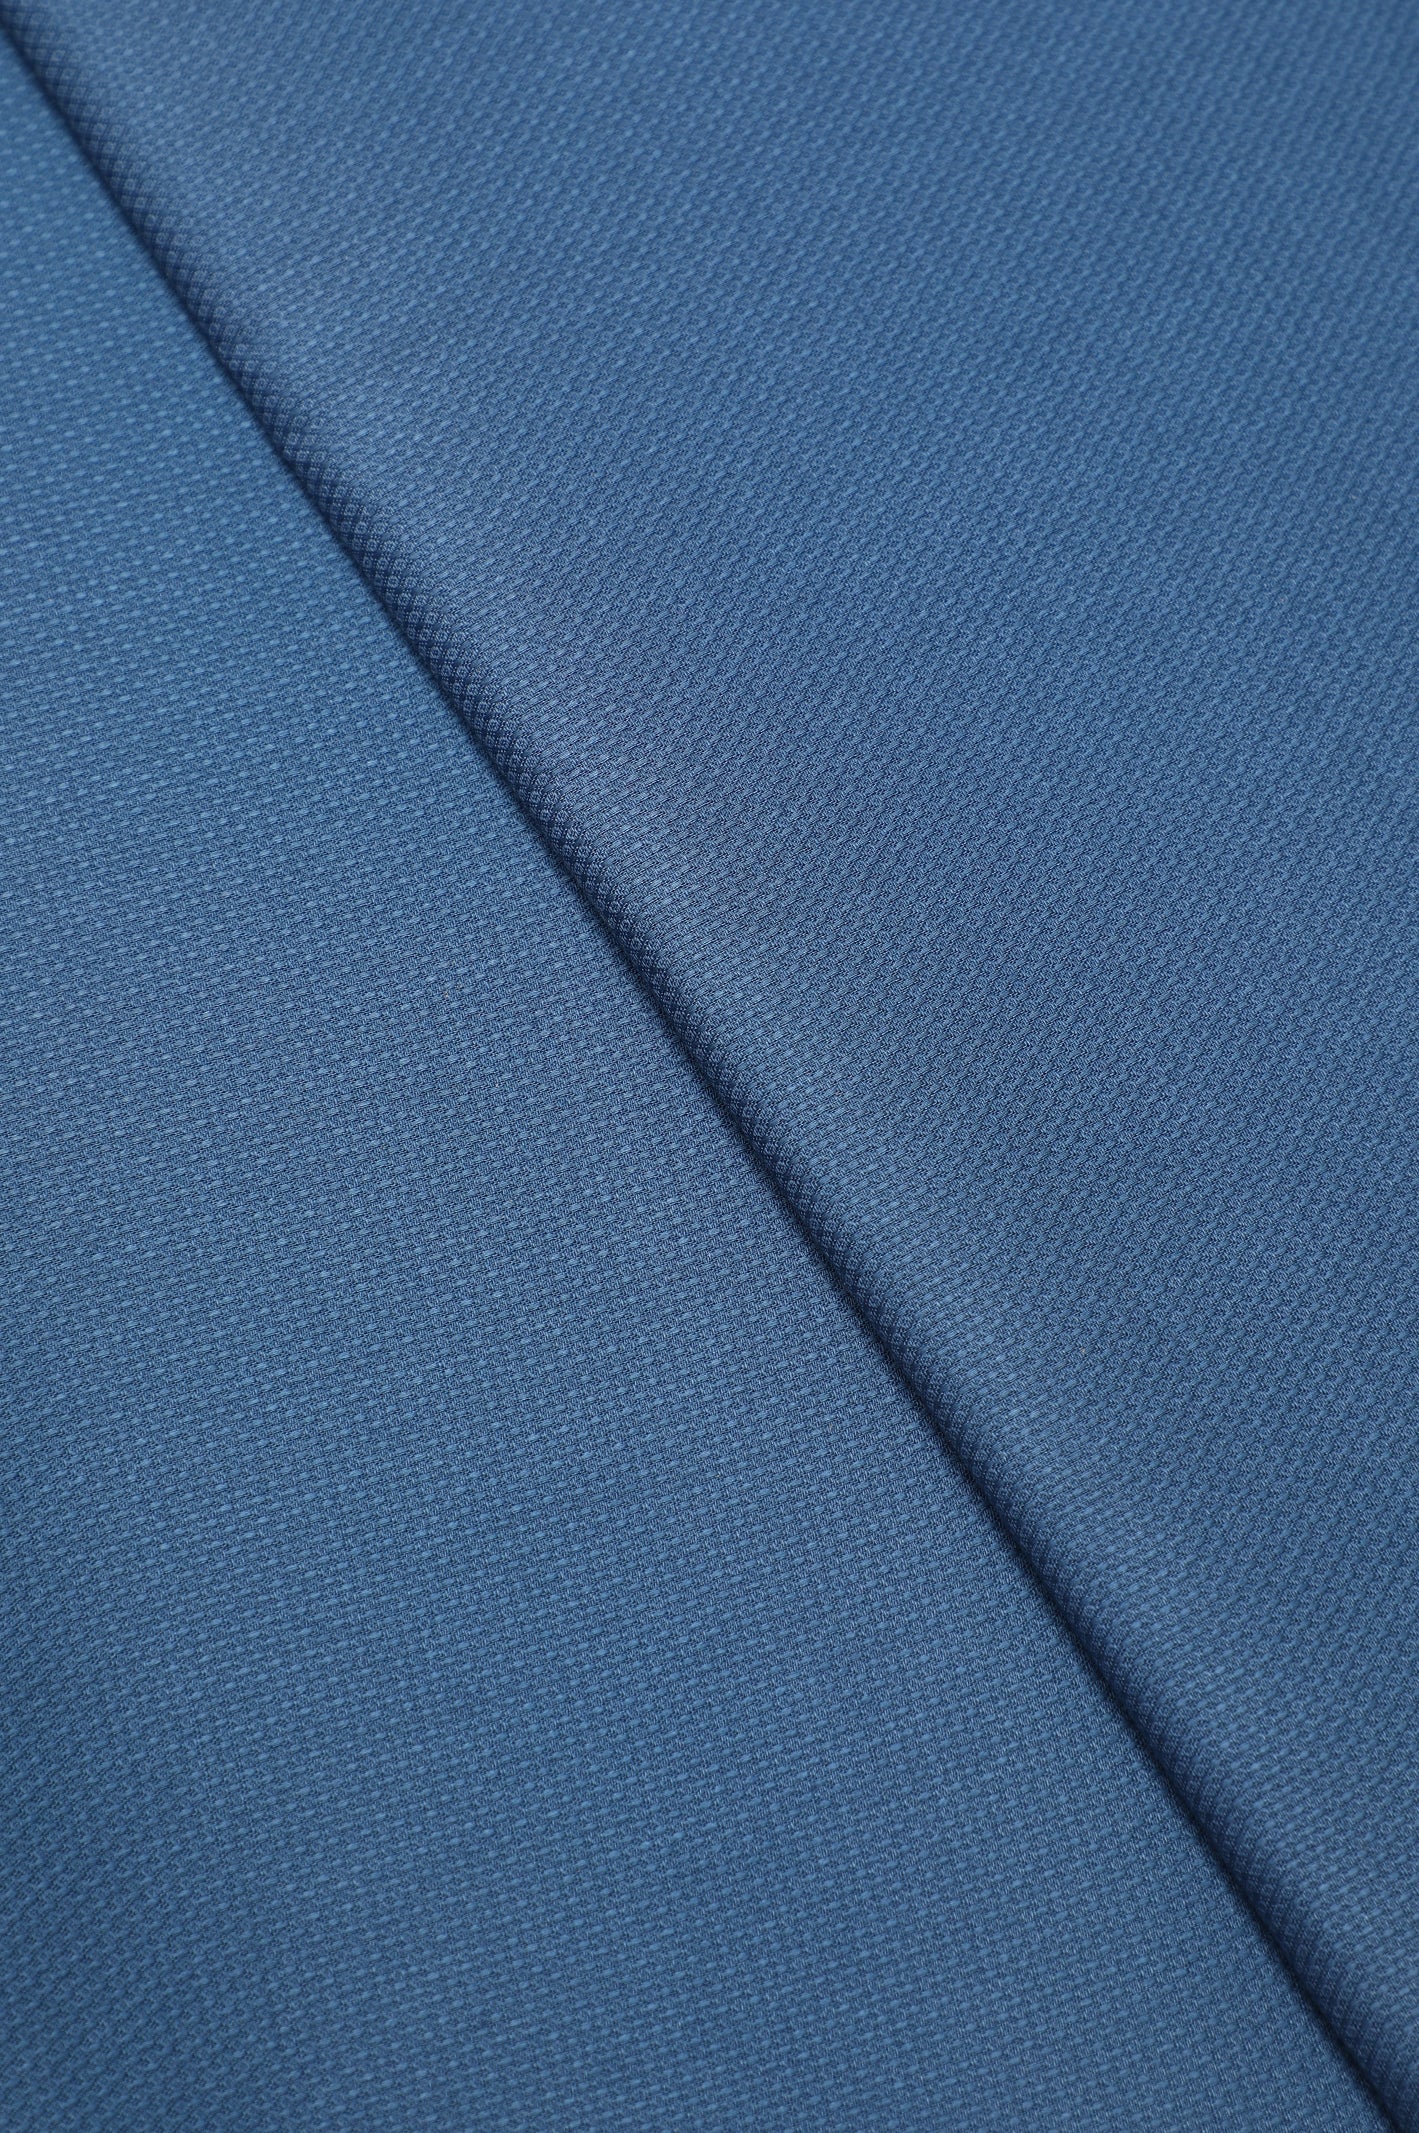 Self Unstitched Fabric for Men - Diners